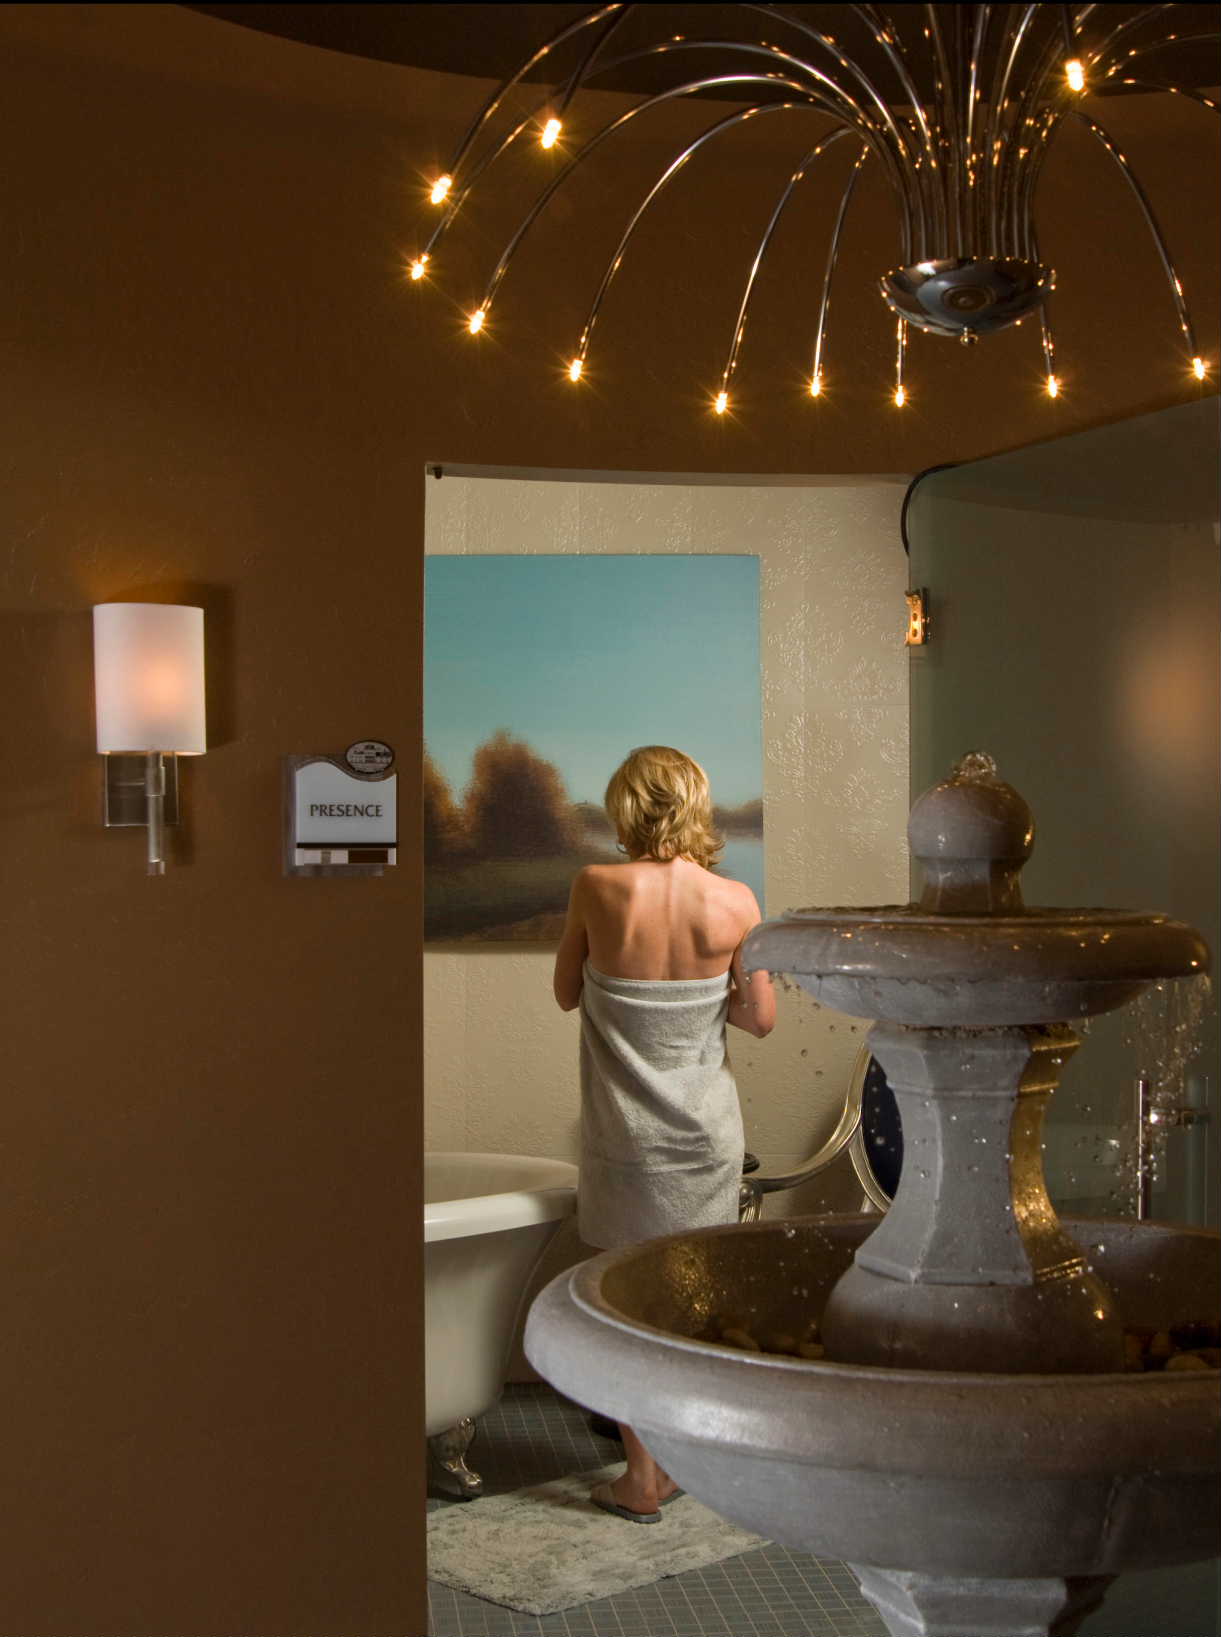 Private soaking tubs allow guests to relax prior to their spa appointments